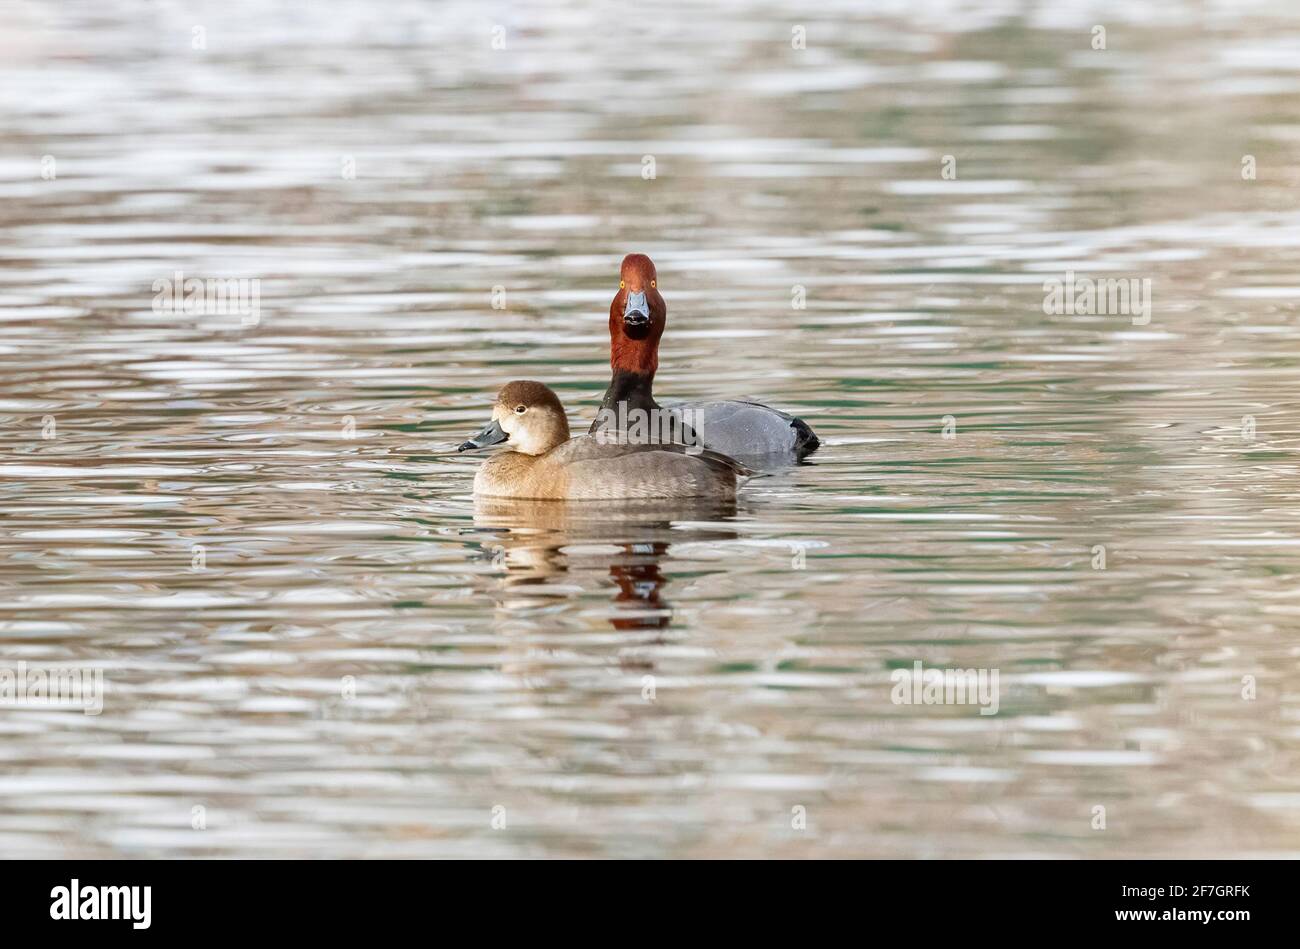 A Redhead drake duck with a long, outstretched neck, performing a courtship posturing ritual behind a Redhead hen. Stock Photo